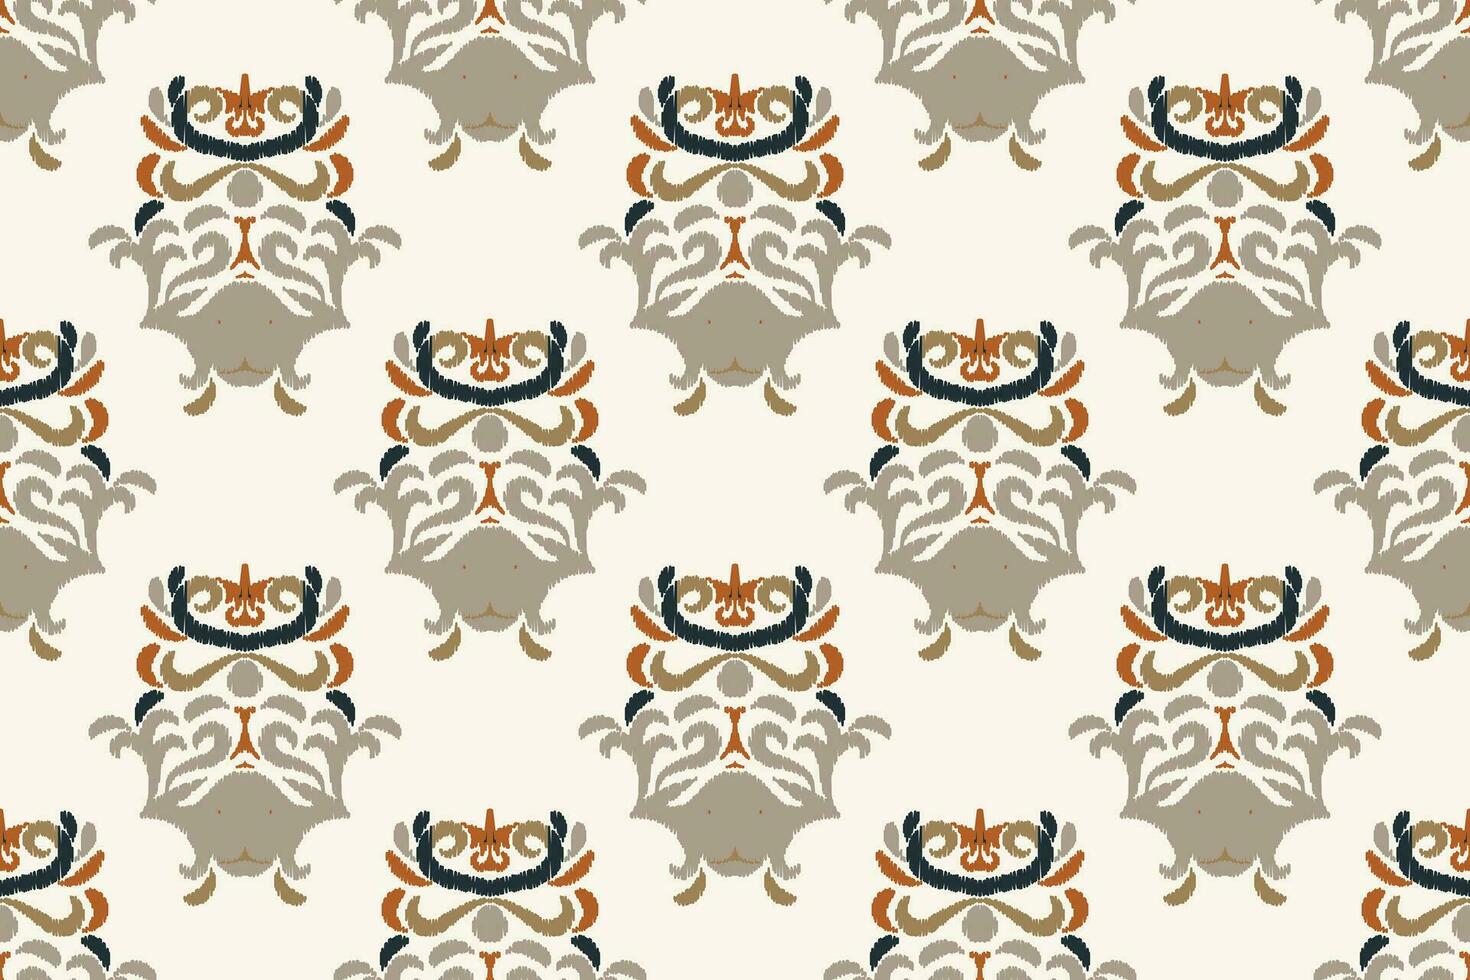 Ikat Damask Paisley Embroidery Background. Ikat Chevron Geometric Ethnic Oriental Pattern Traditional. Ikat Aztec Style Abstract Design for Print Texture,fabric,saree,sari,carpet. vector